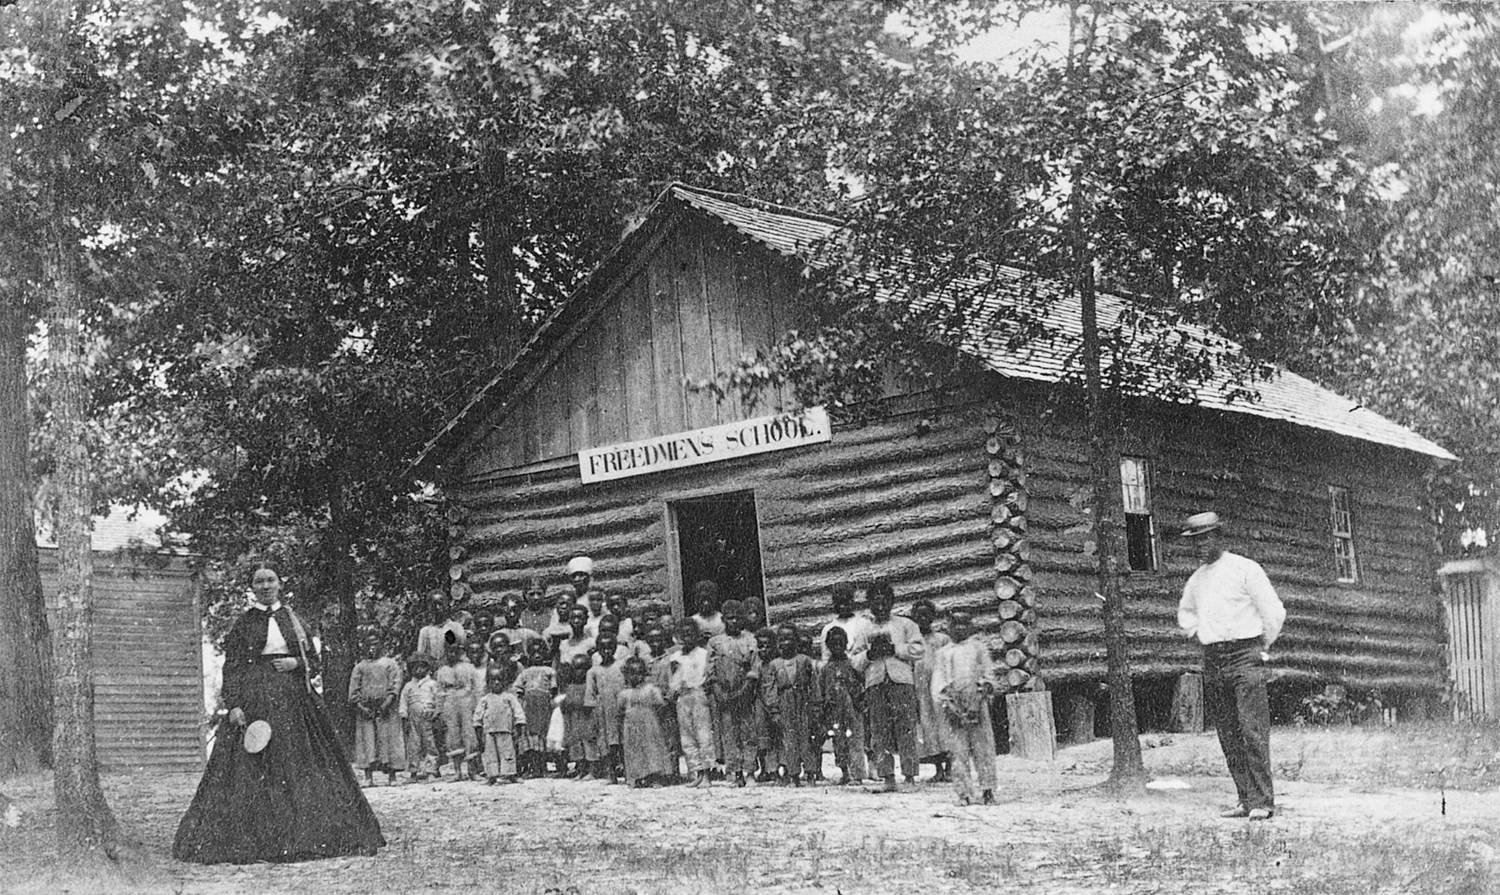 Many former slaves understood that illiteracy was an implement of bondage. The Freedmen’s Bureau bui